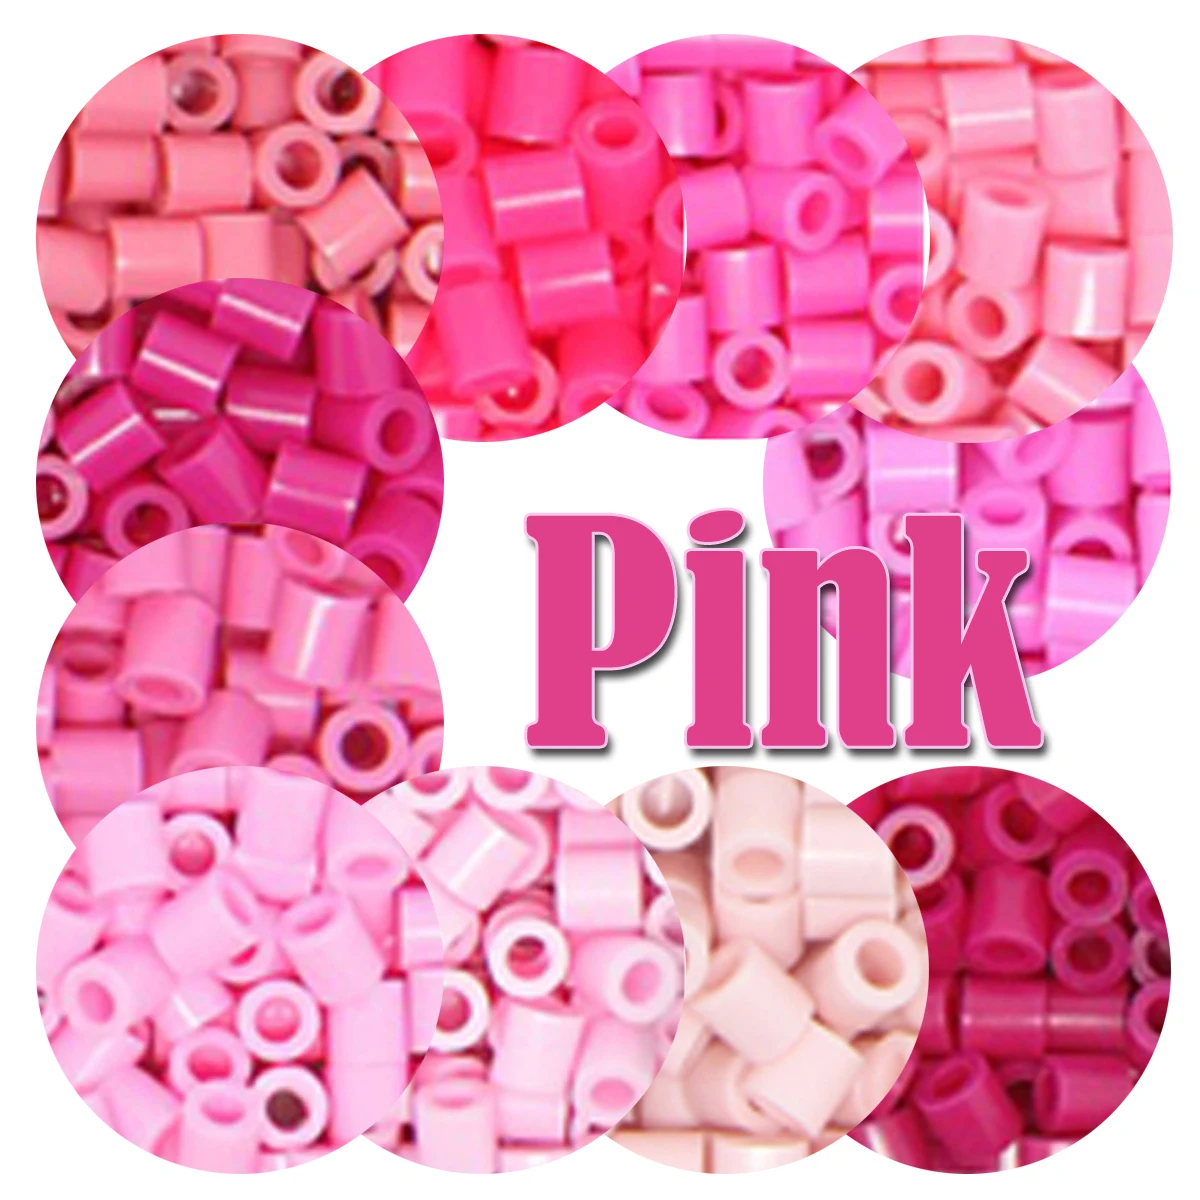 Pink Color 5mm Beads 1000PCS Pixel Art Hama Beads for Kids Iron Fuse Beads Diy Puzzles Gift Children Toys hama kids